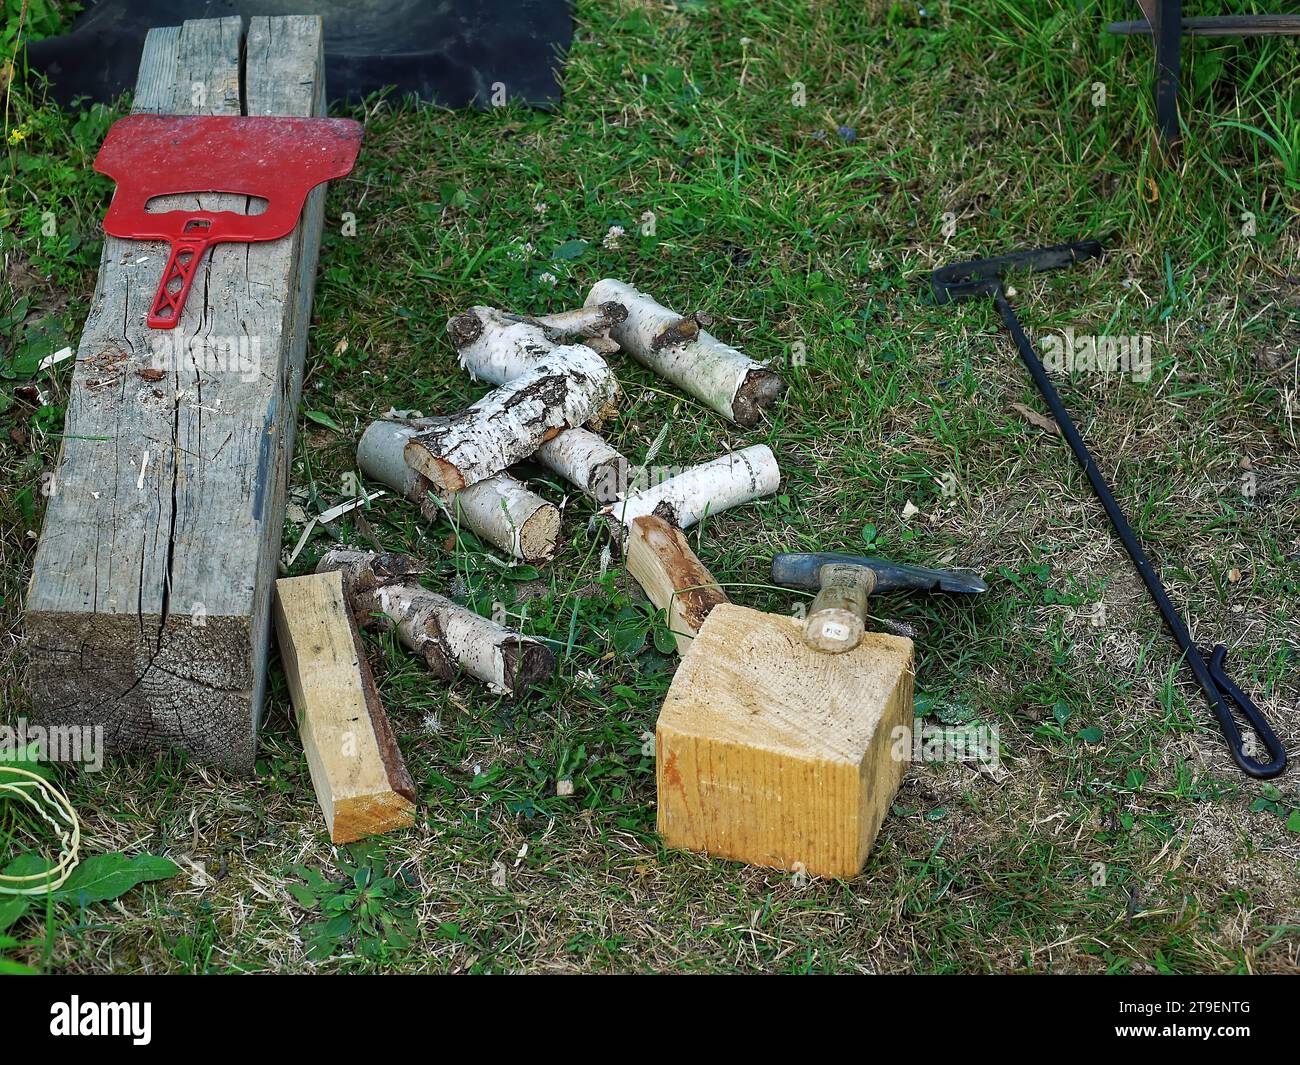 Firewood is lying near the barbecue, in the village Stock Photo